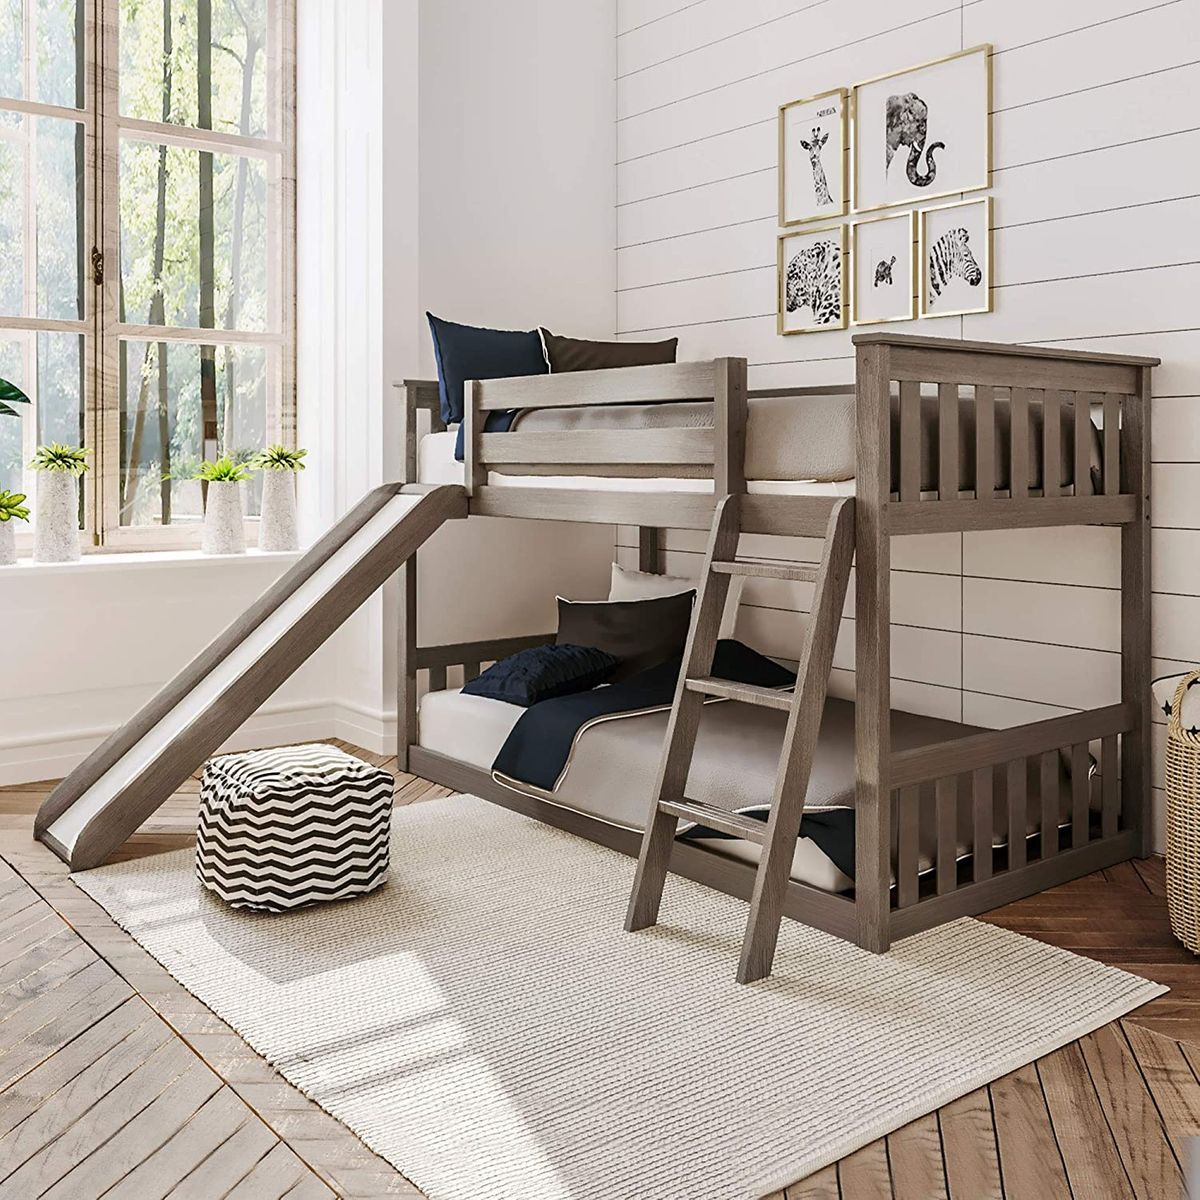 8 Best Bunk Beds 2022 The Strategist, Is A Bunk Bed Mattress The Same Size As Twin